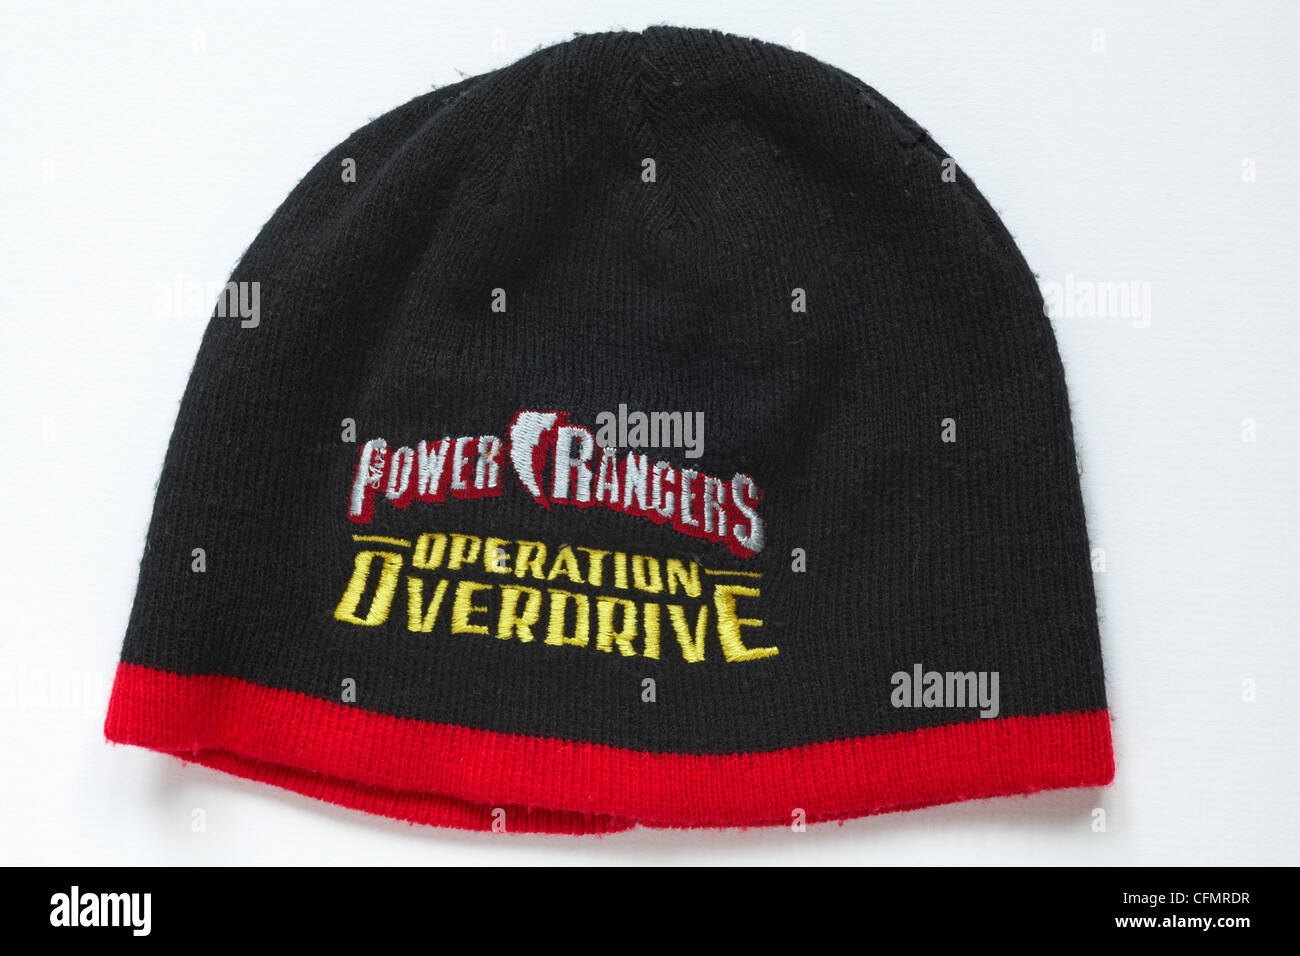 Power Rangers operation overdrive hat isolated on white background Stock Photo